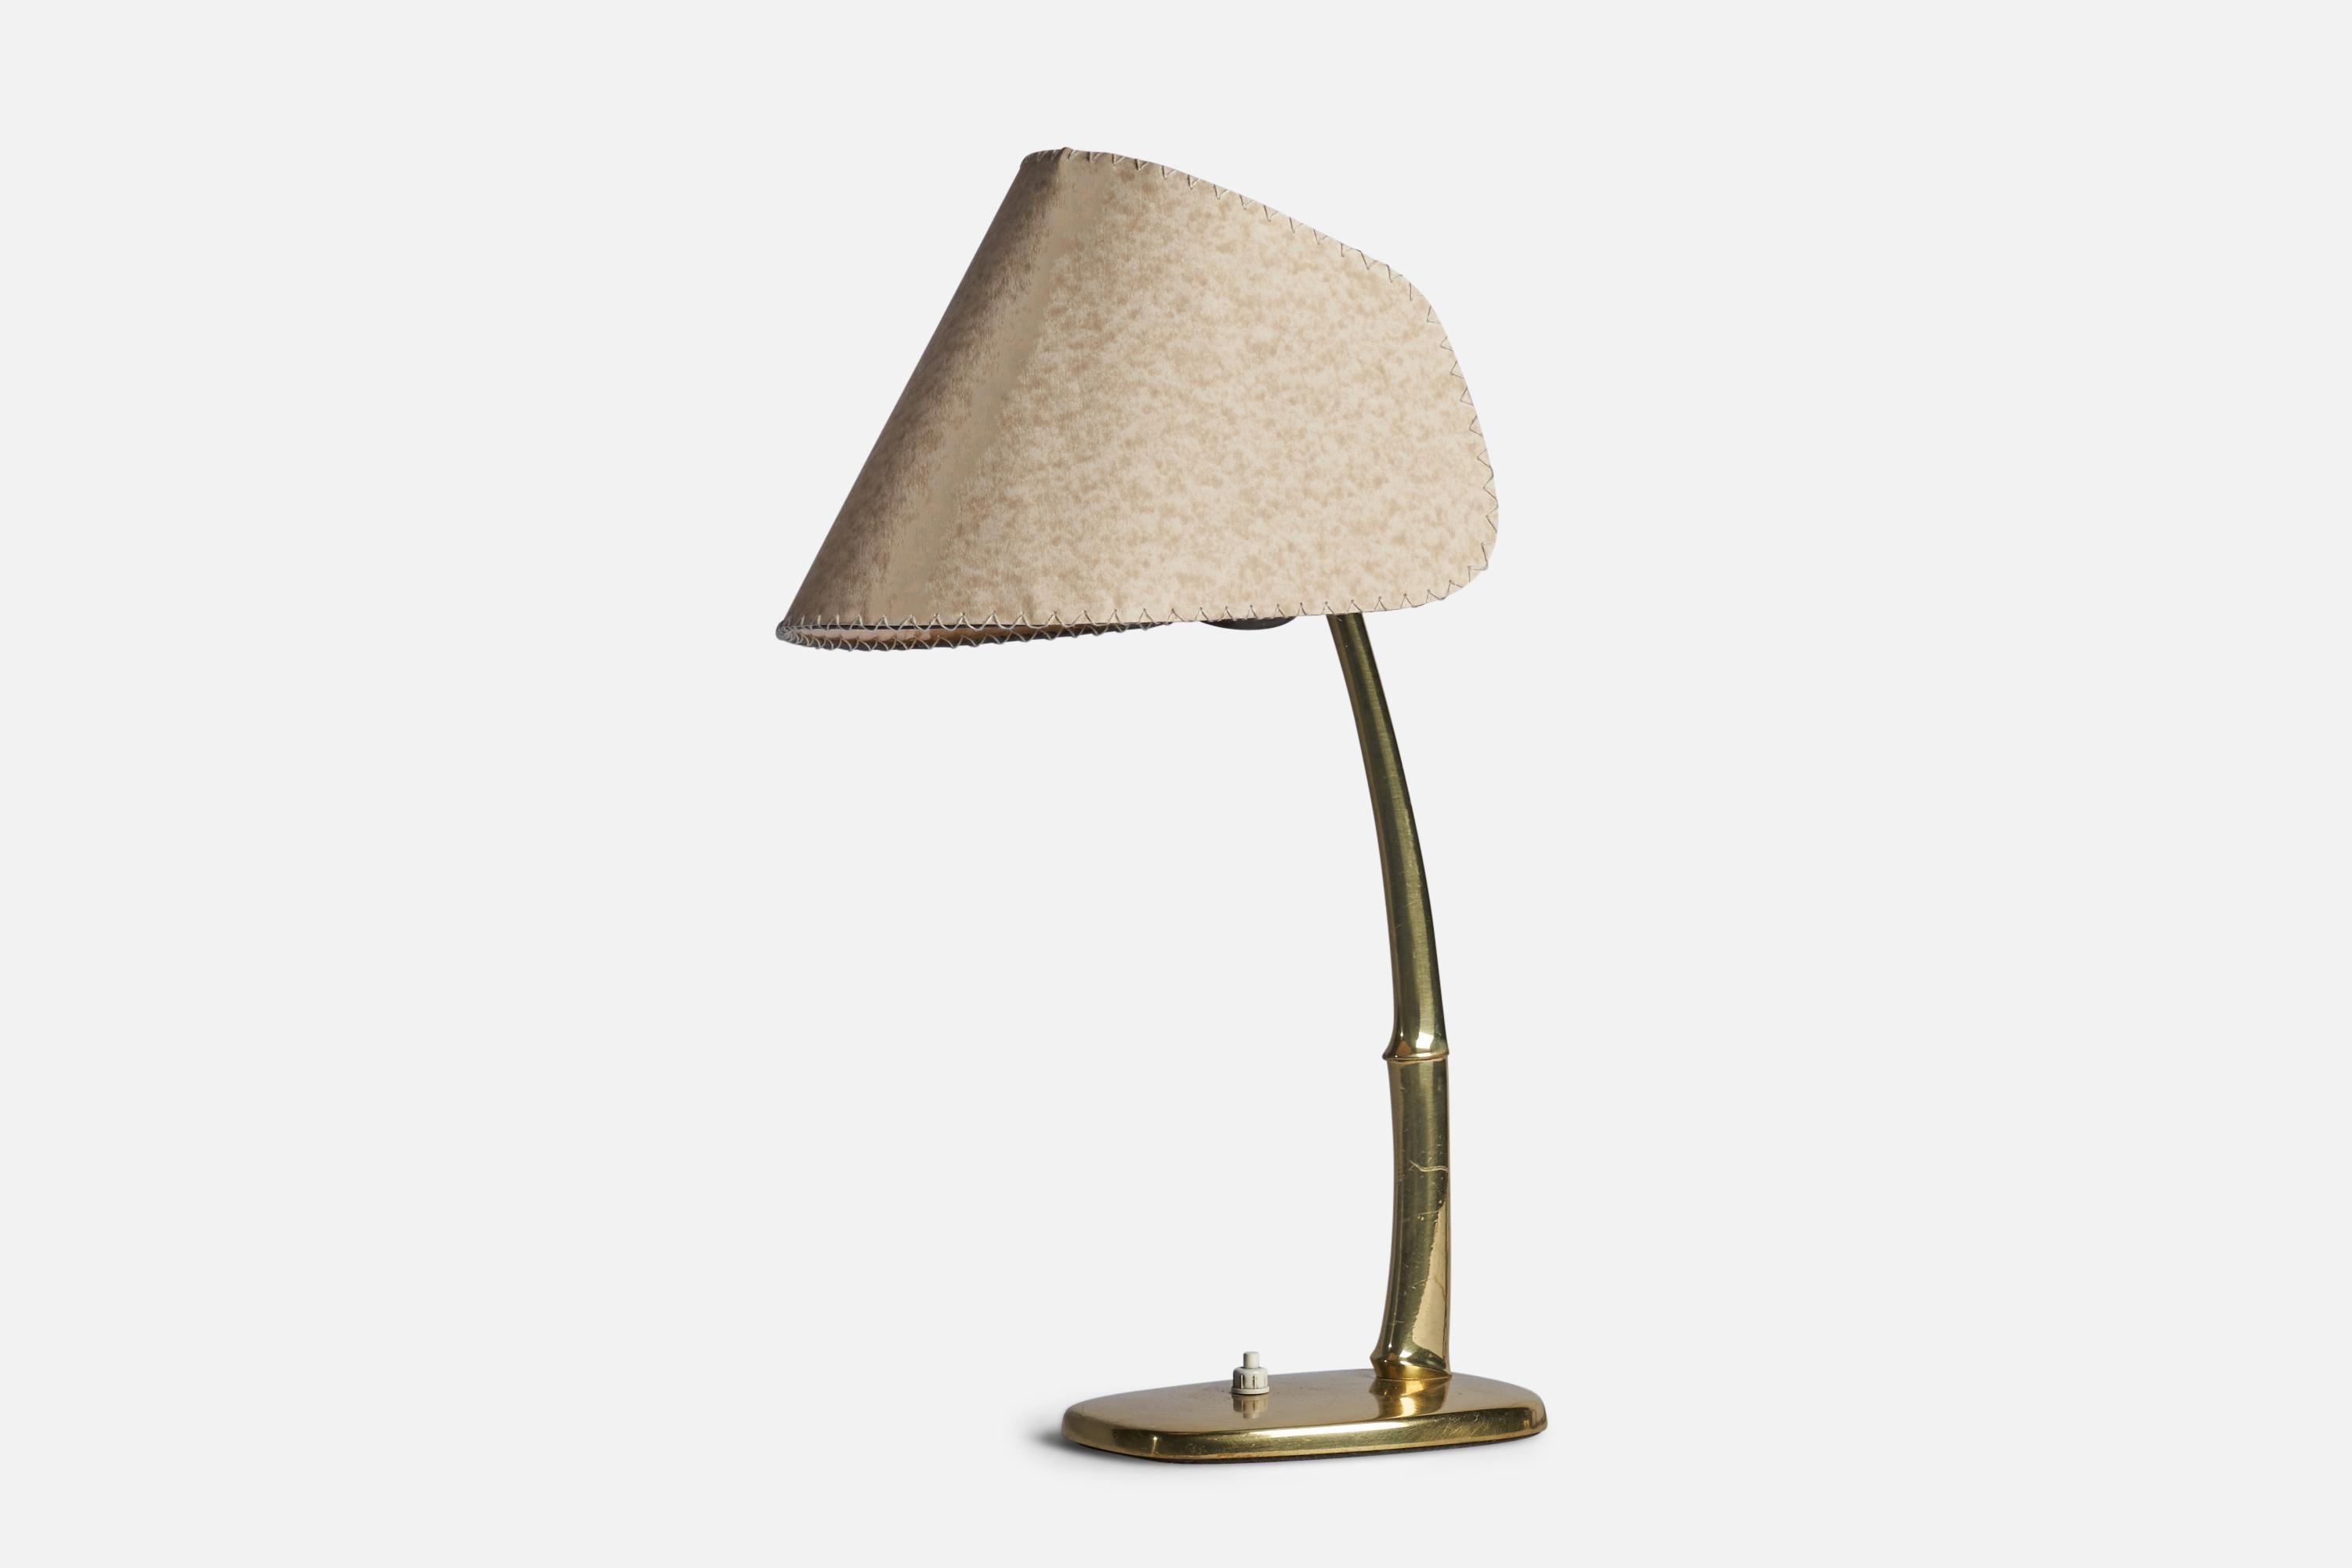 
A brass and paper table lamp designed by Arnold Poell and produced by J.T. Kalmar, Austria, 1950s.
Overall Dimensions (inches): 17.75” H x 4.65” W x 6.25” D
Bulb Specifications: E-26 Bulb
Number of Sockets: 1
All lighting will be converted for US